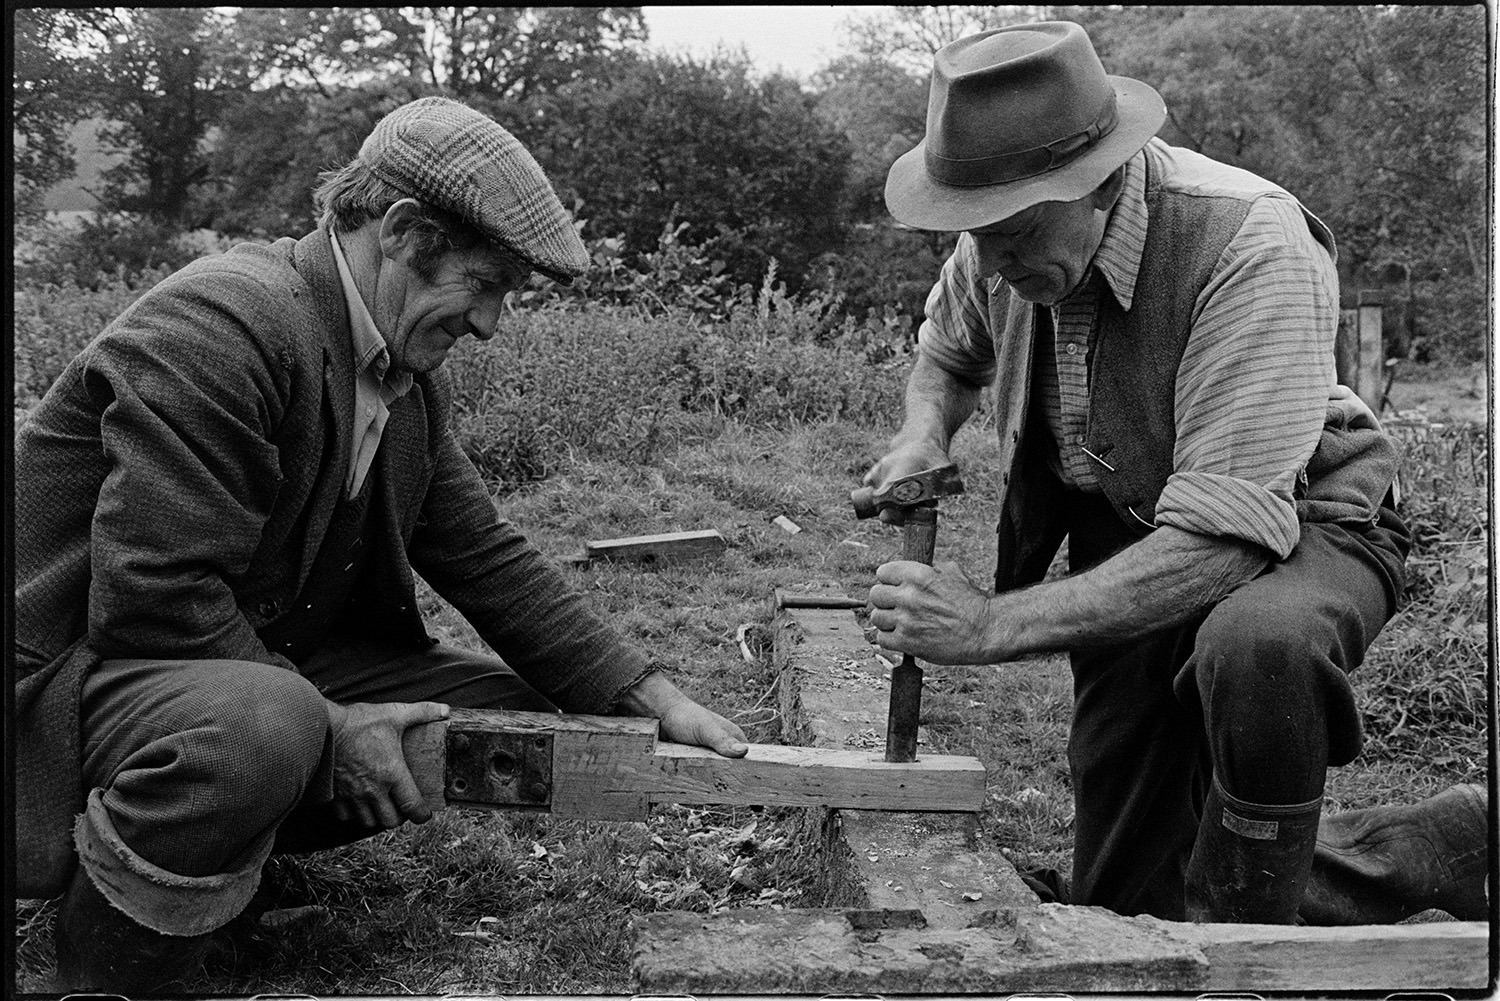 Men repairing sluice gate of mill leat. 
[Two men repairing a wooden sluice gate of the leat running to Head Mill, Kings Nympton.  They are using a hammer and chisel to shape one of the wooden parts of the sluice.]